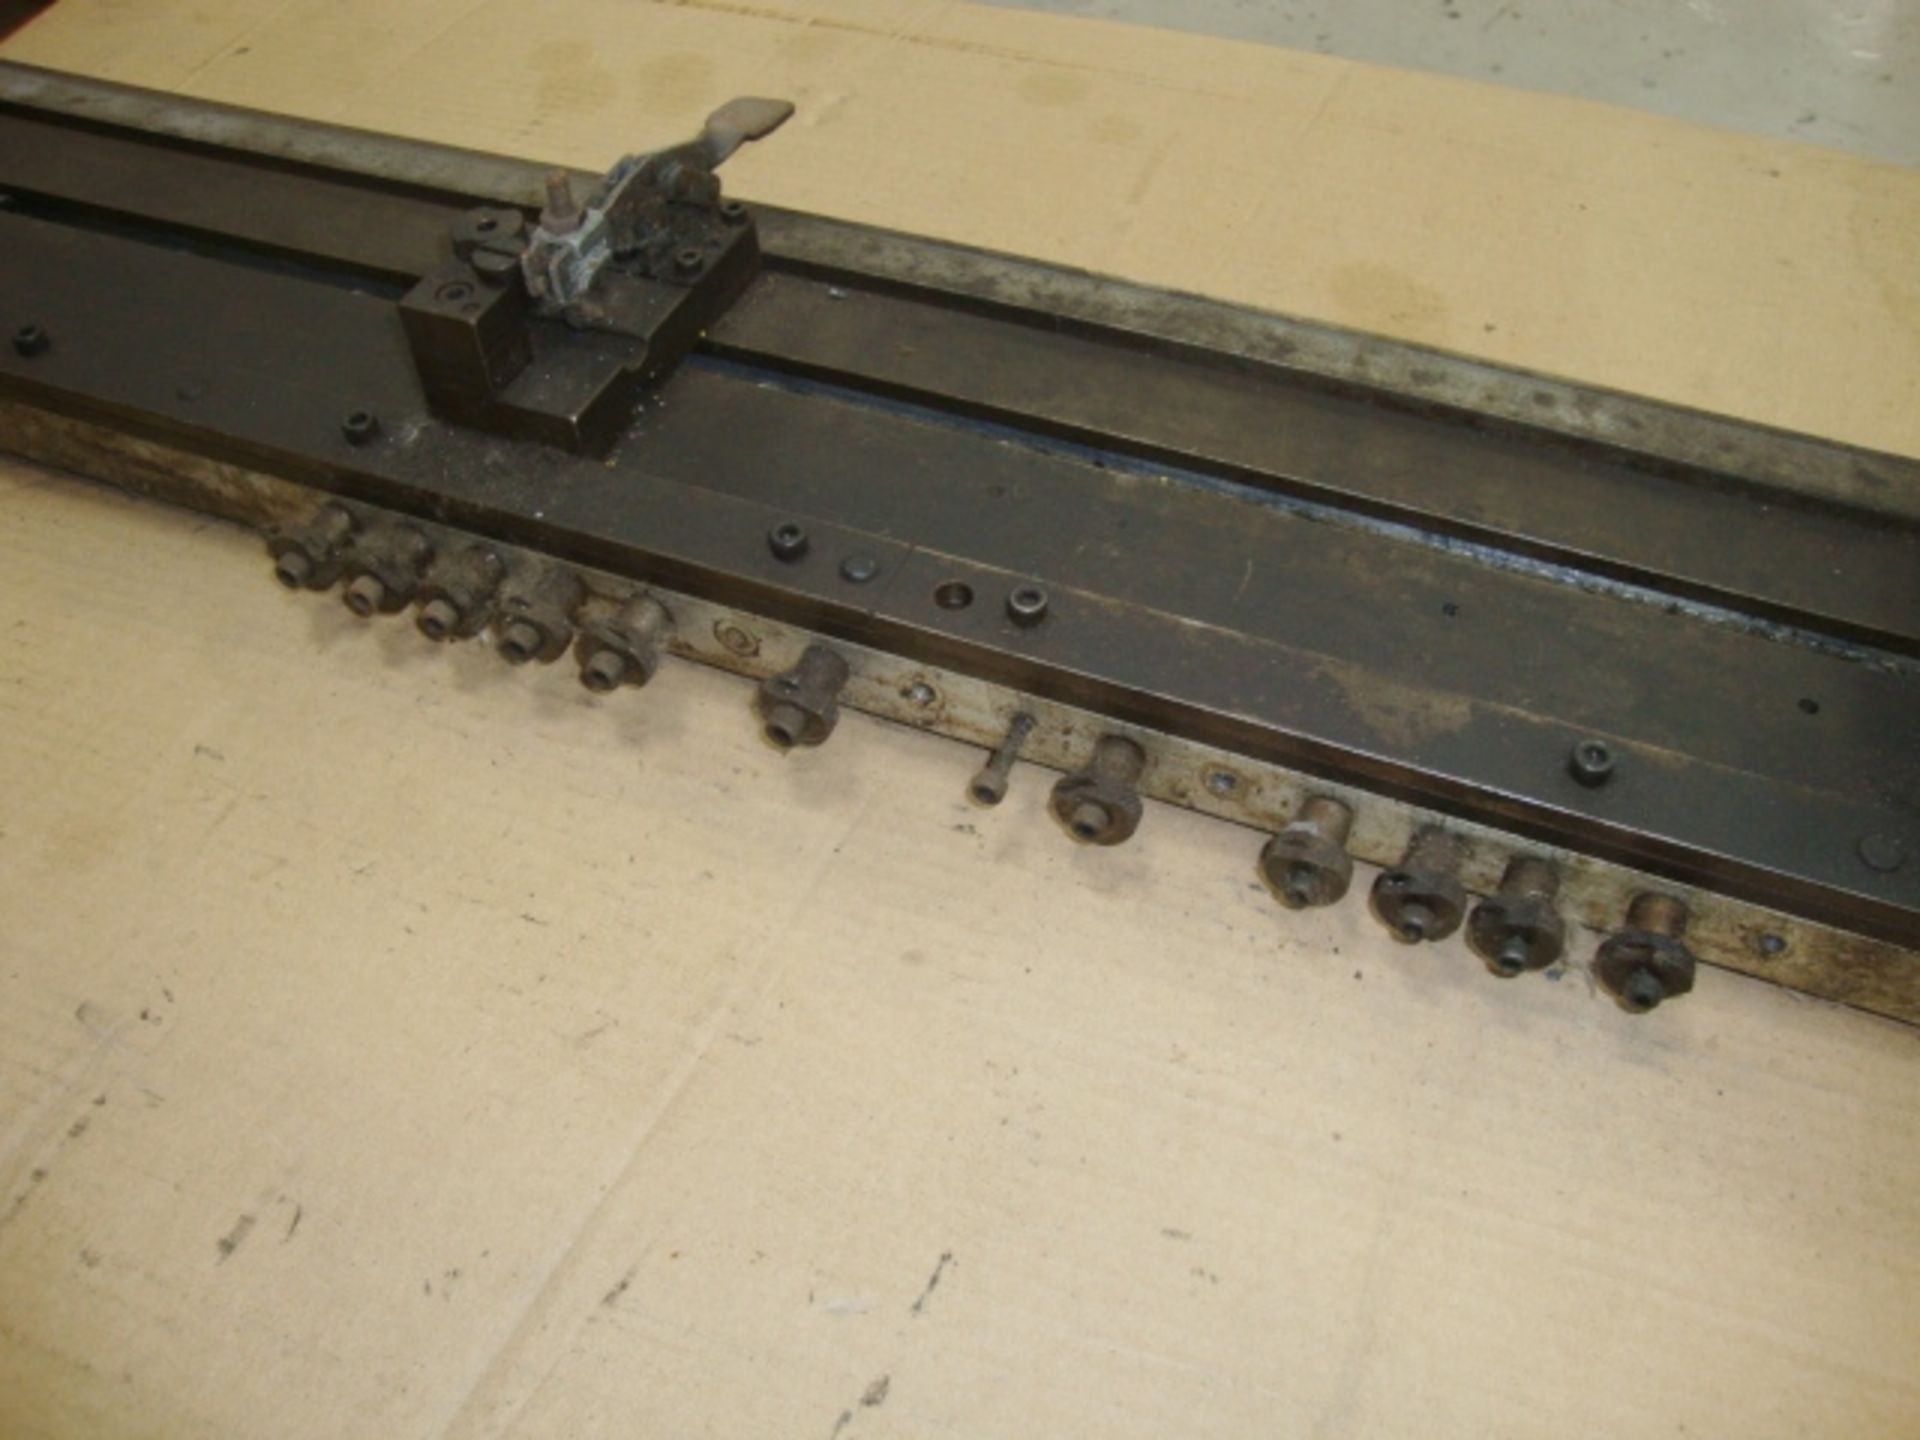 Aluminum Clamping Fixture, approx. 36" x 6" - Image 2 of 3